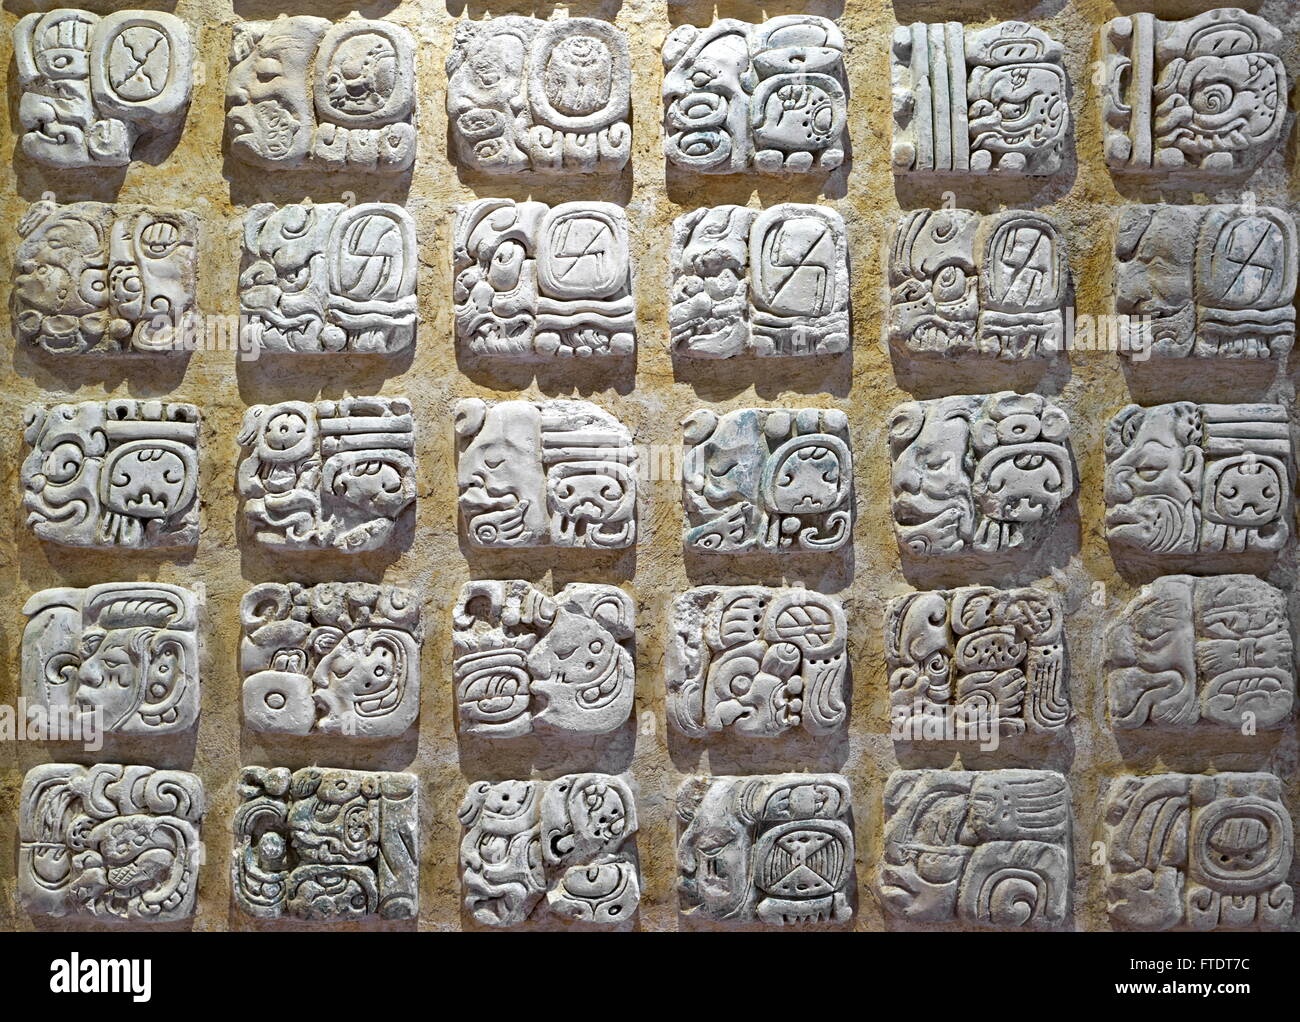 Maya writing system, Palenque Archaeological Museum, Chiapas, Mexico Stock Photo